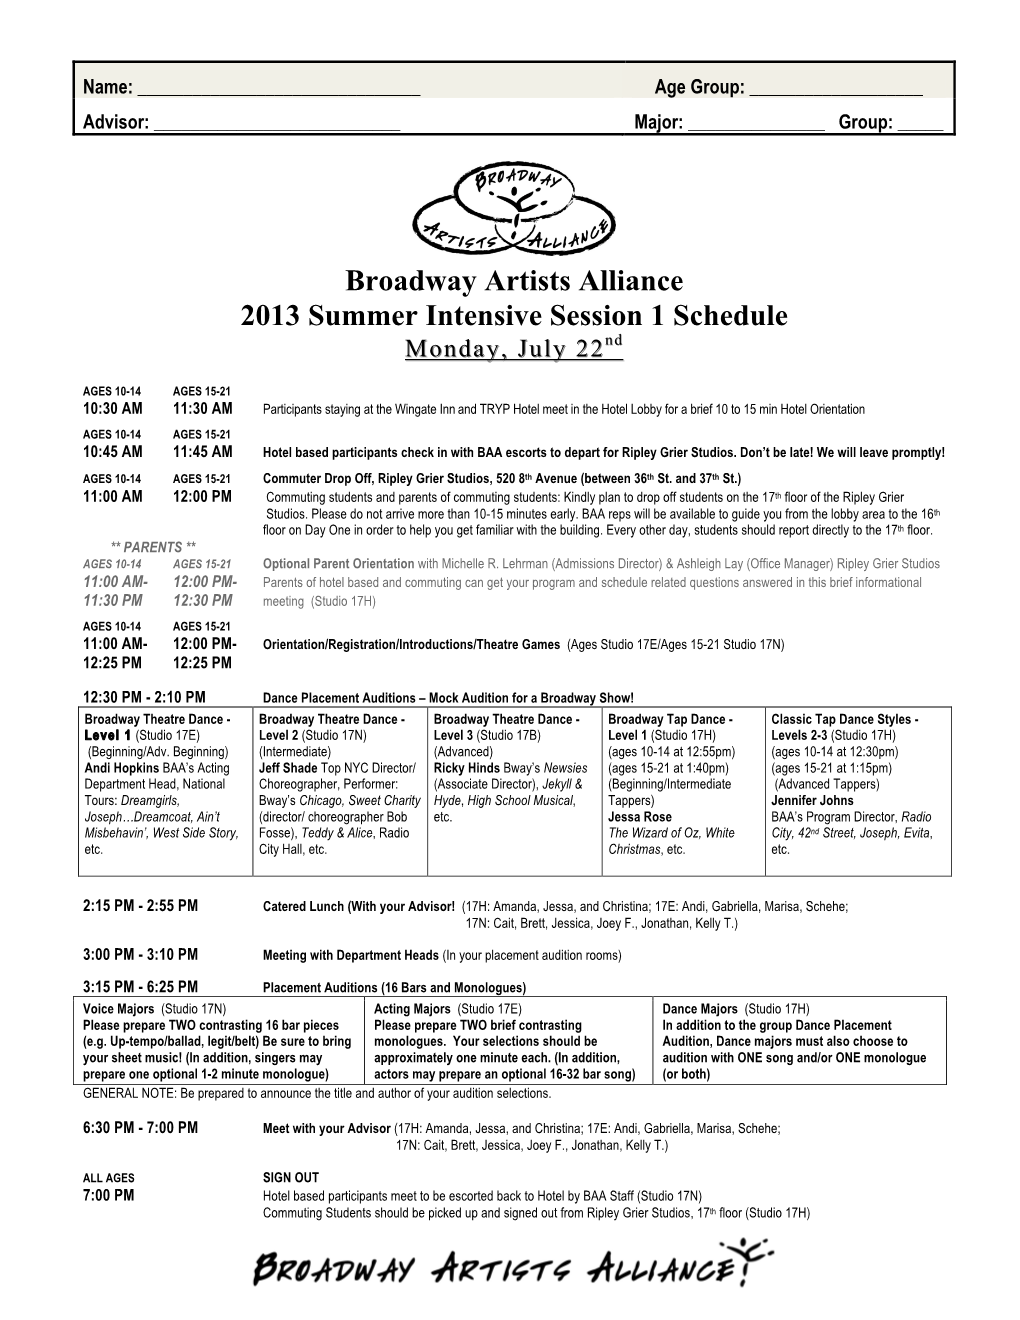 Broadway Artists Alliance 2013 Summer Intensive Session 1 Schedule Monday, July 22Nd